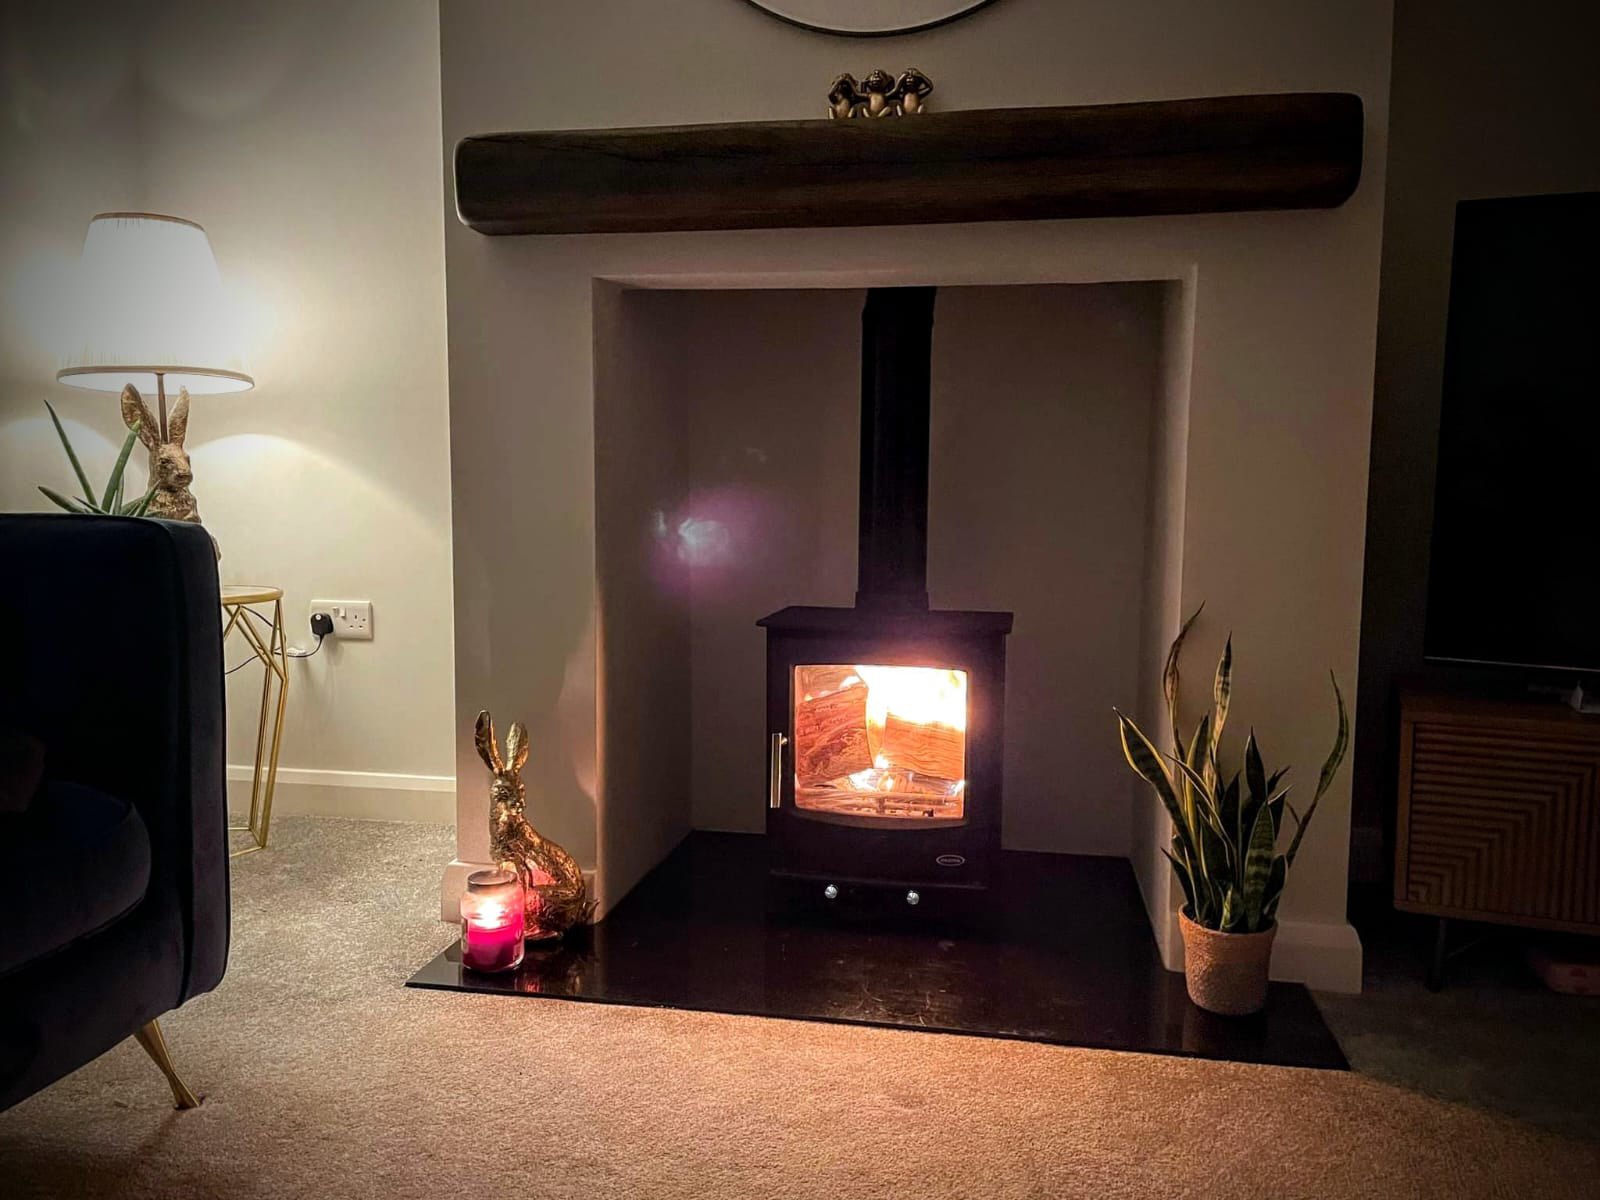 How Not To Install a Wood Burning Stove